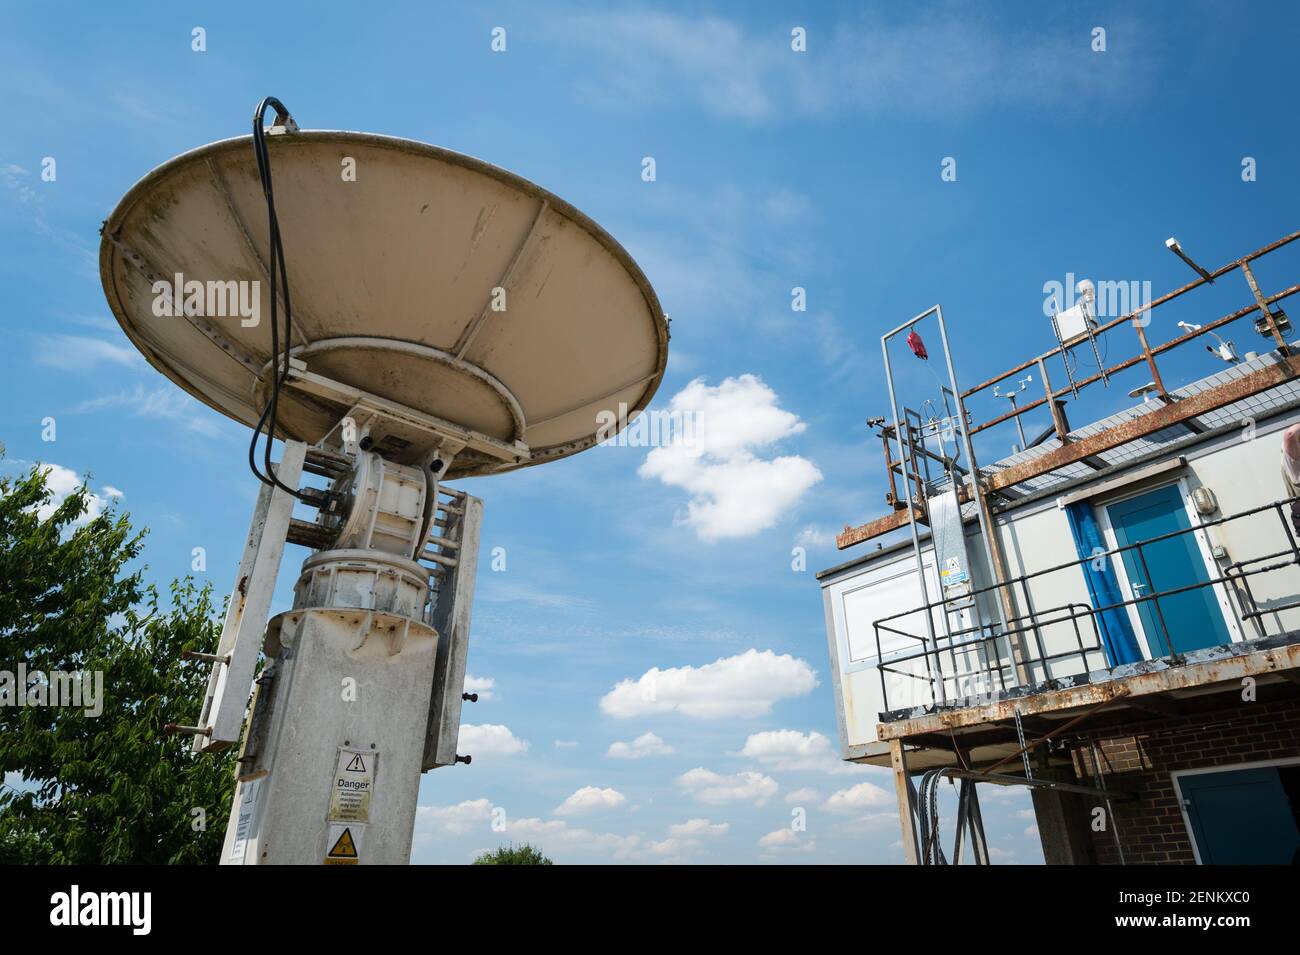 Ausgediente Radarantenne am Chilbolton Observatory des Science and Technology Facilities Council, Hampshire. Stockfoto